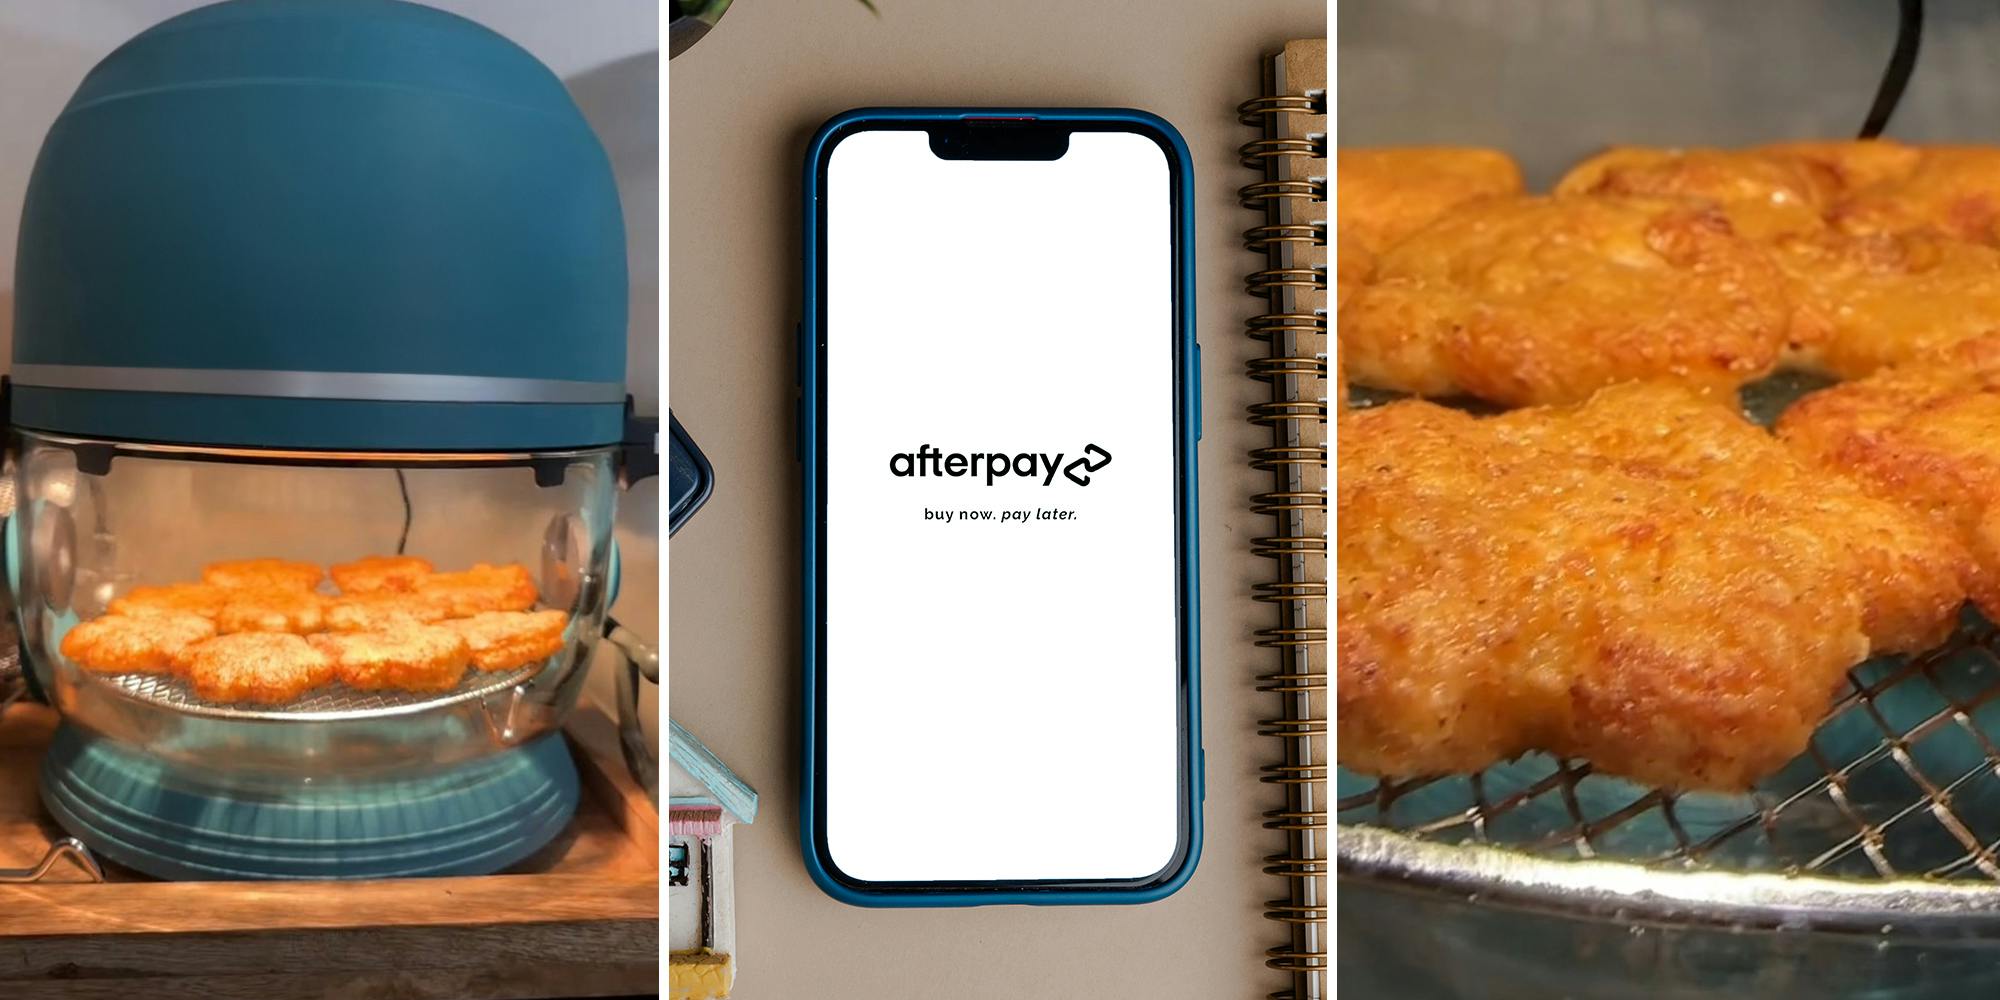 Woman buys glass airfryer with Afterpay after realizing that the counterparts test positive for lead